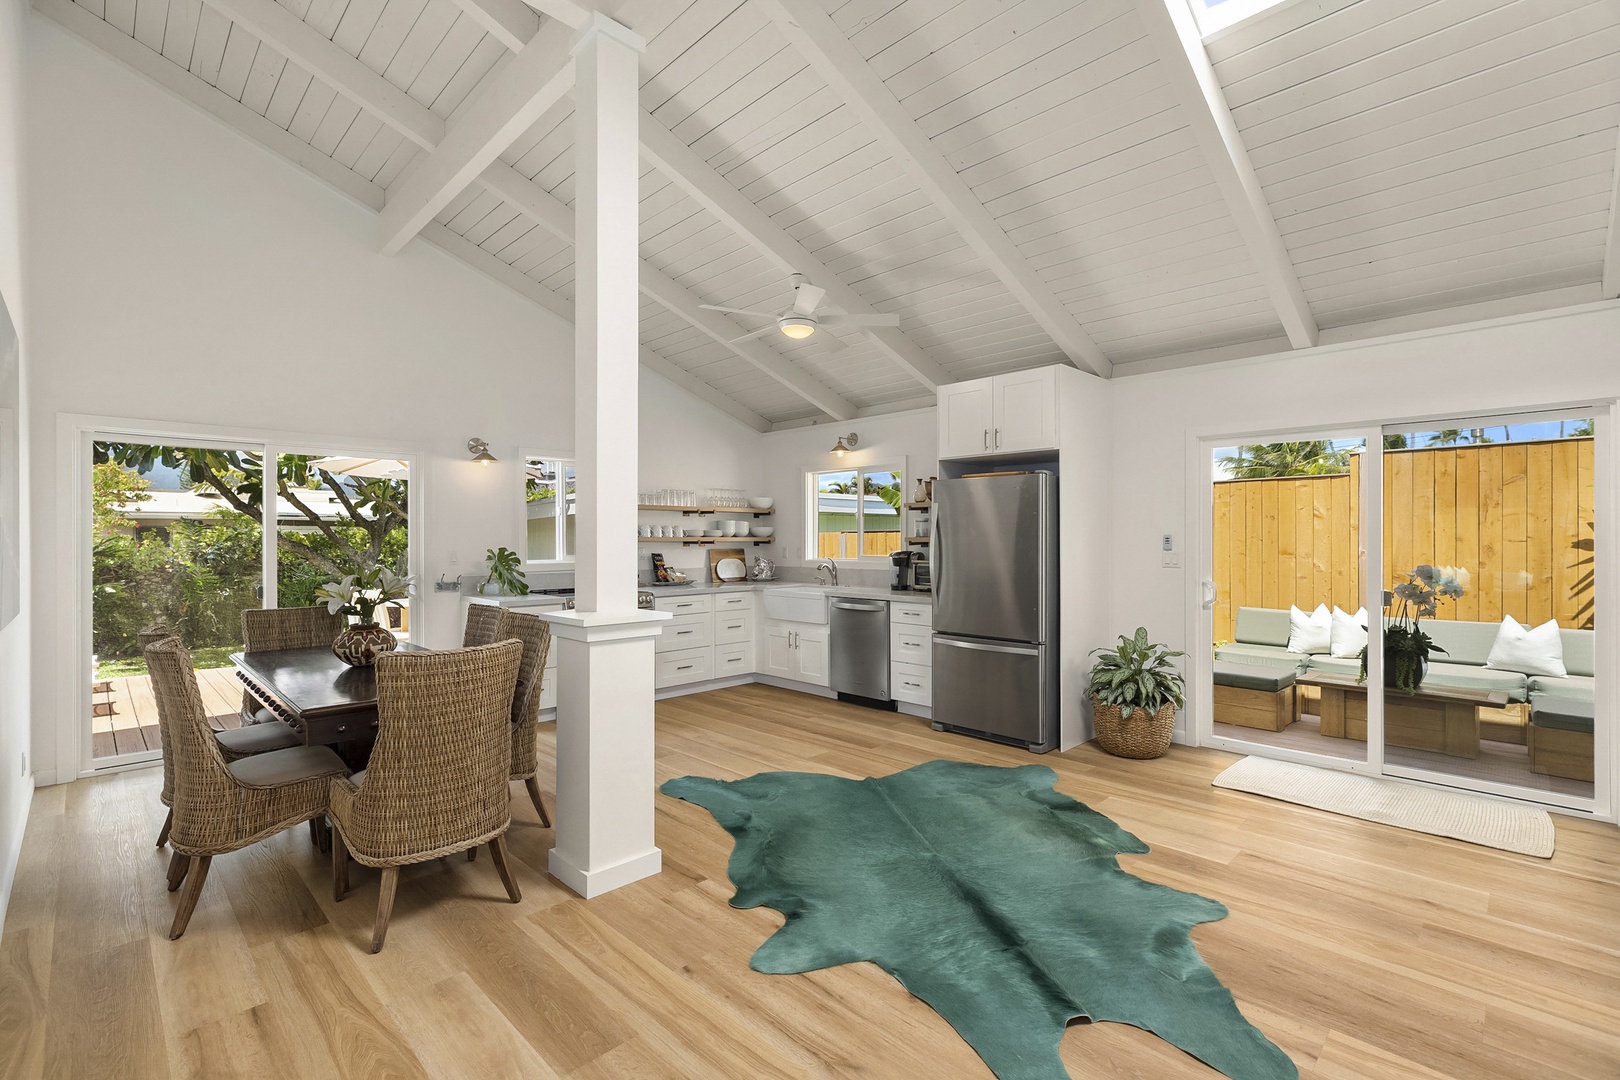 Kailua Vacation Rentals, Ranch Beach House - Open floor plan with Vaulted Ceilings and lots of natural light